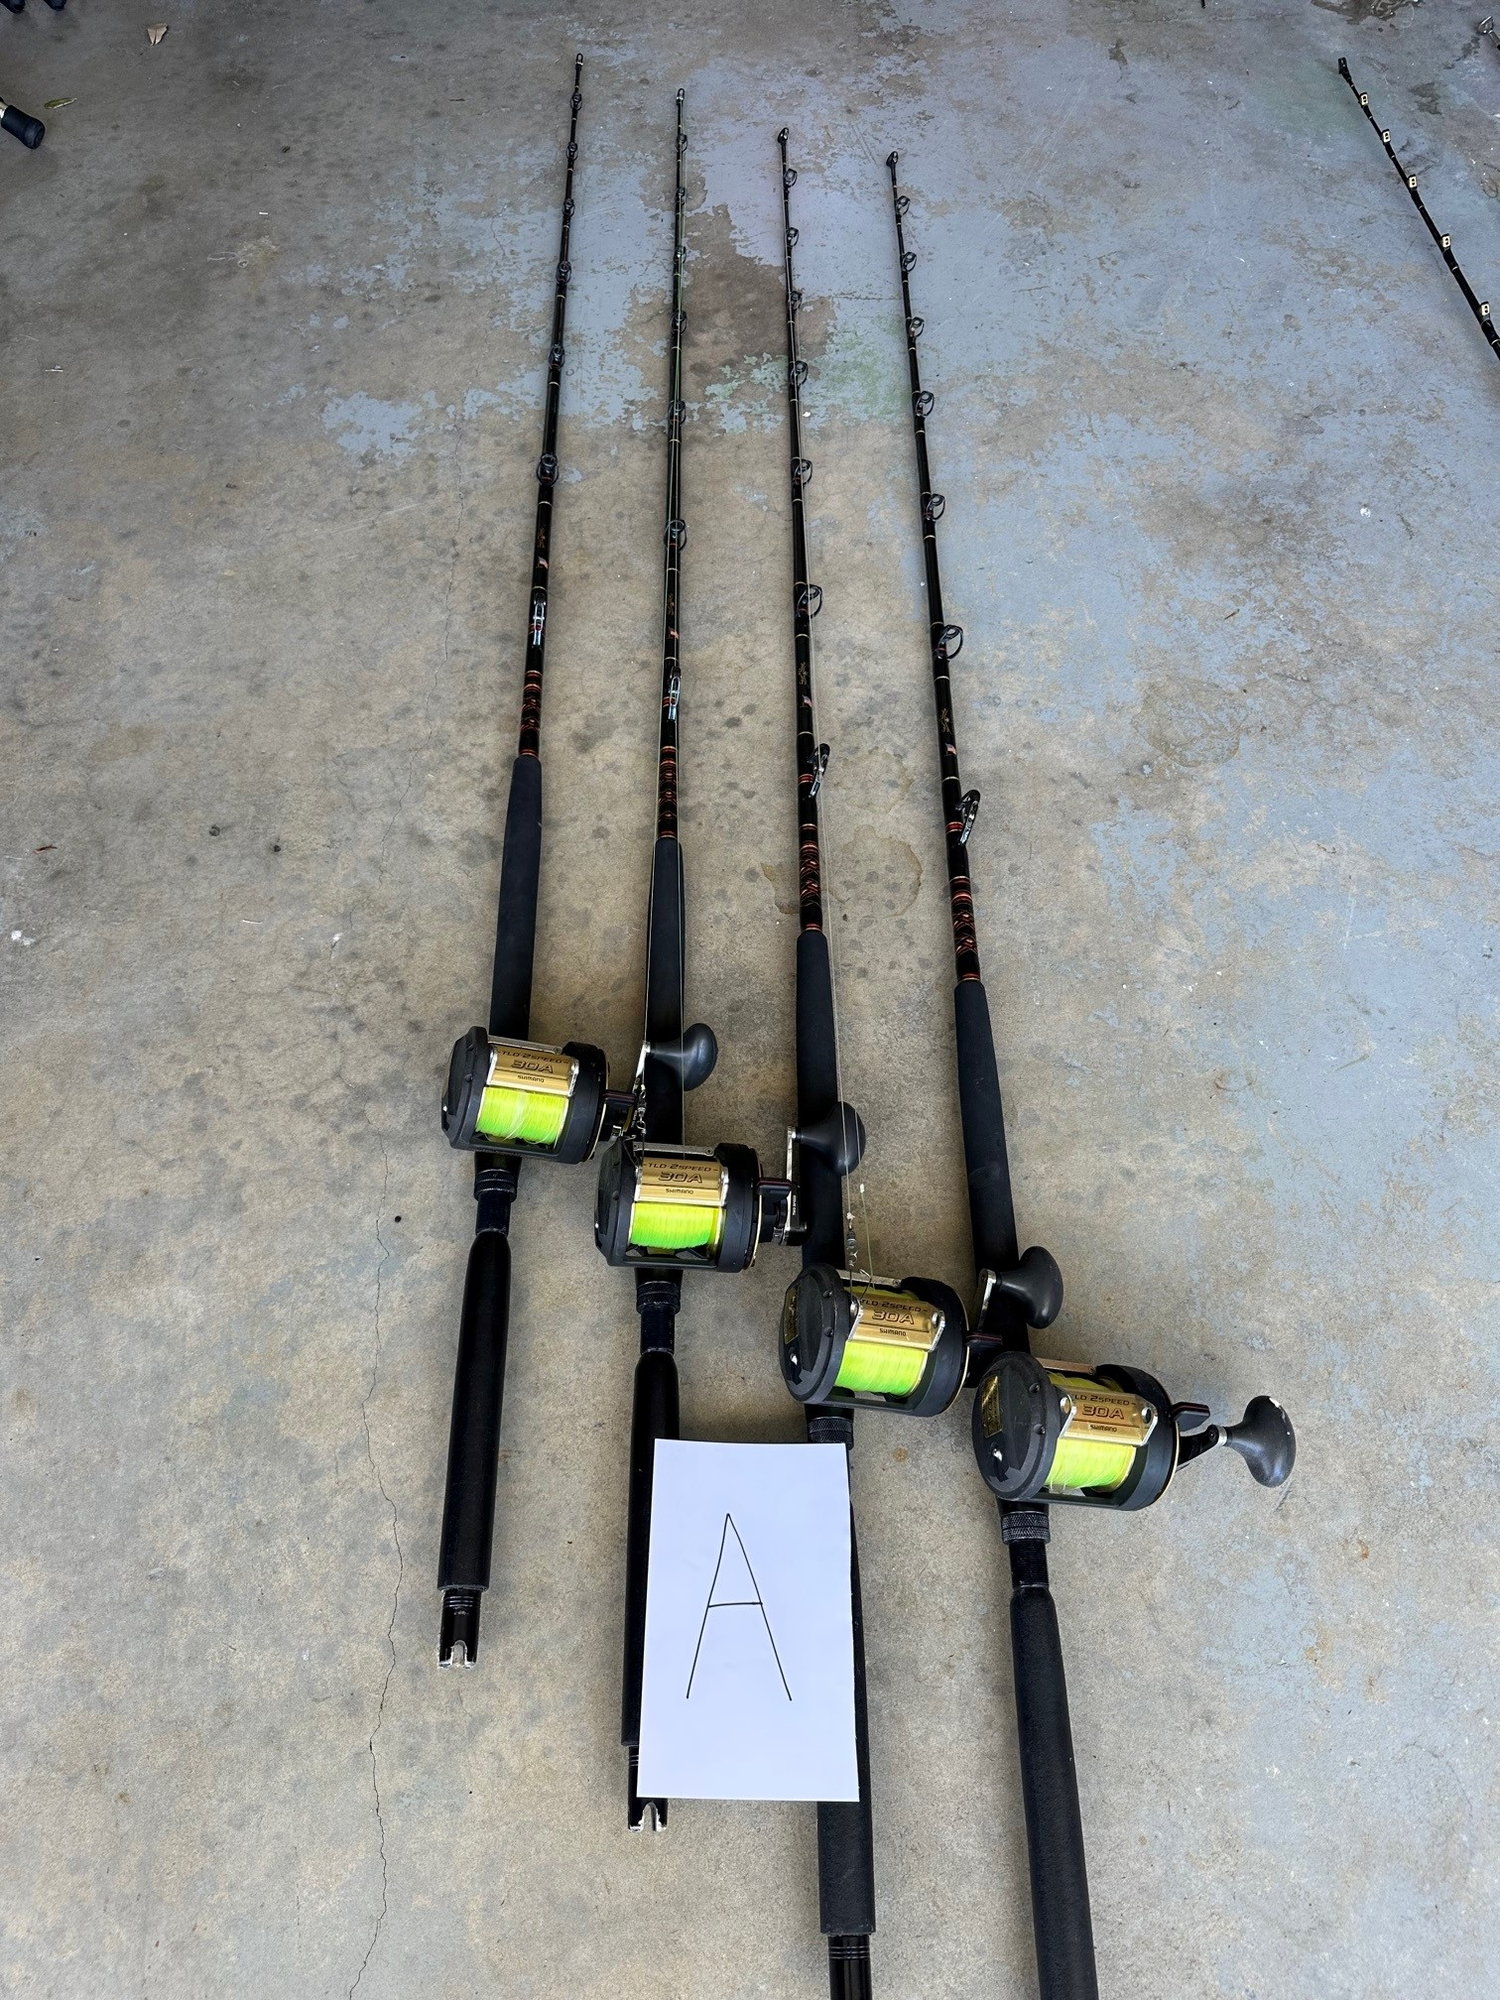 FOR SALE: Rods, Reels, Gear - The Hull Truth - Boating and Fishing